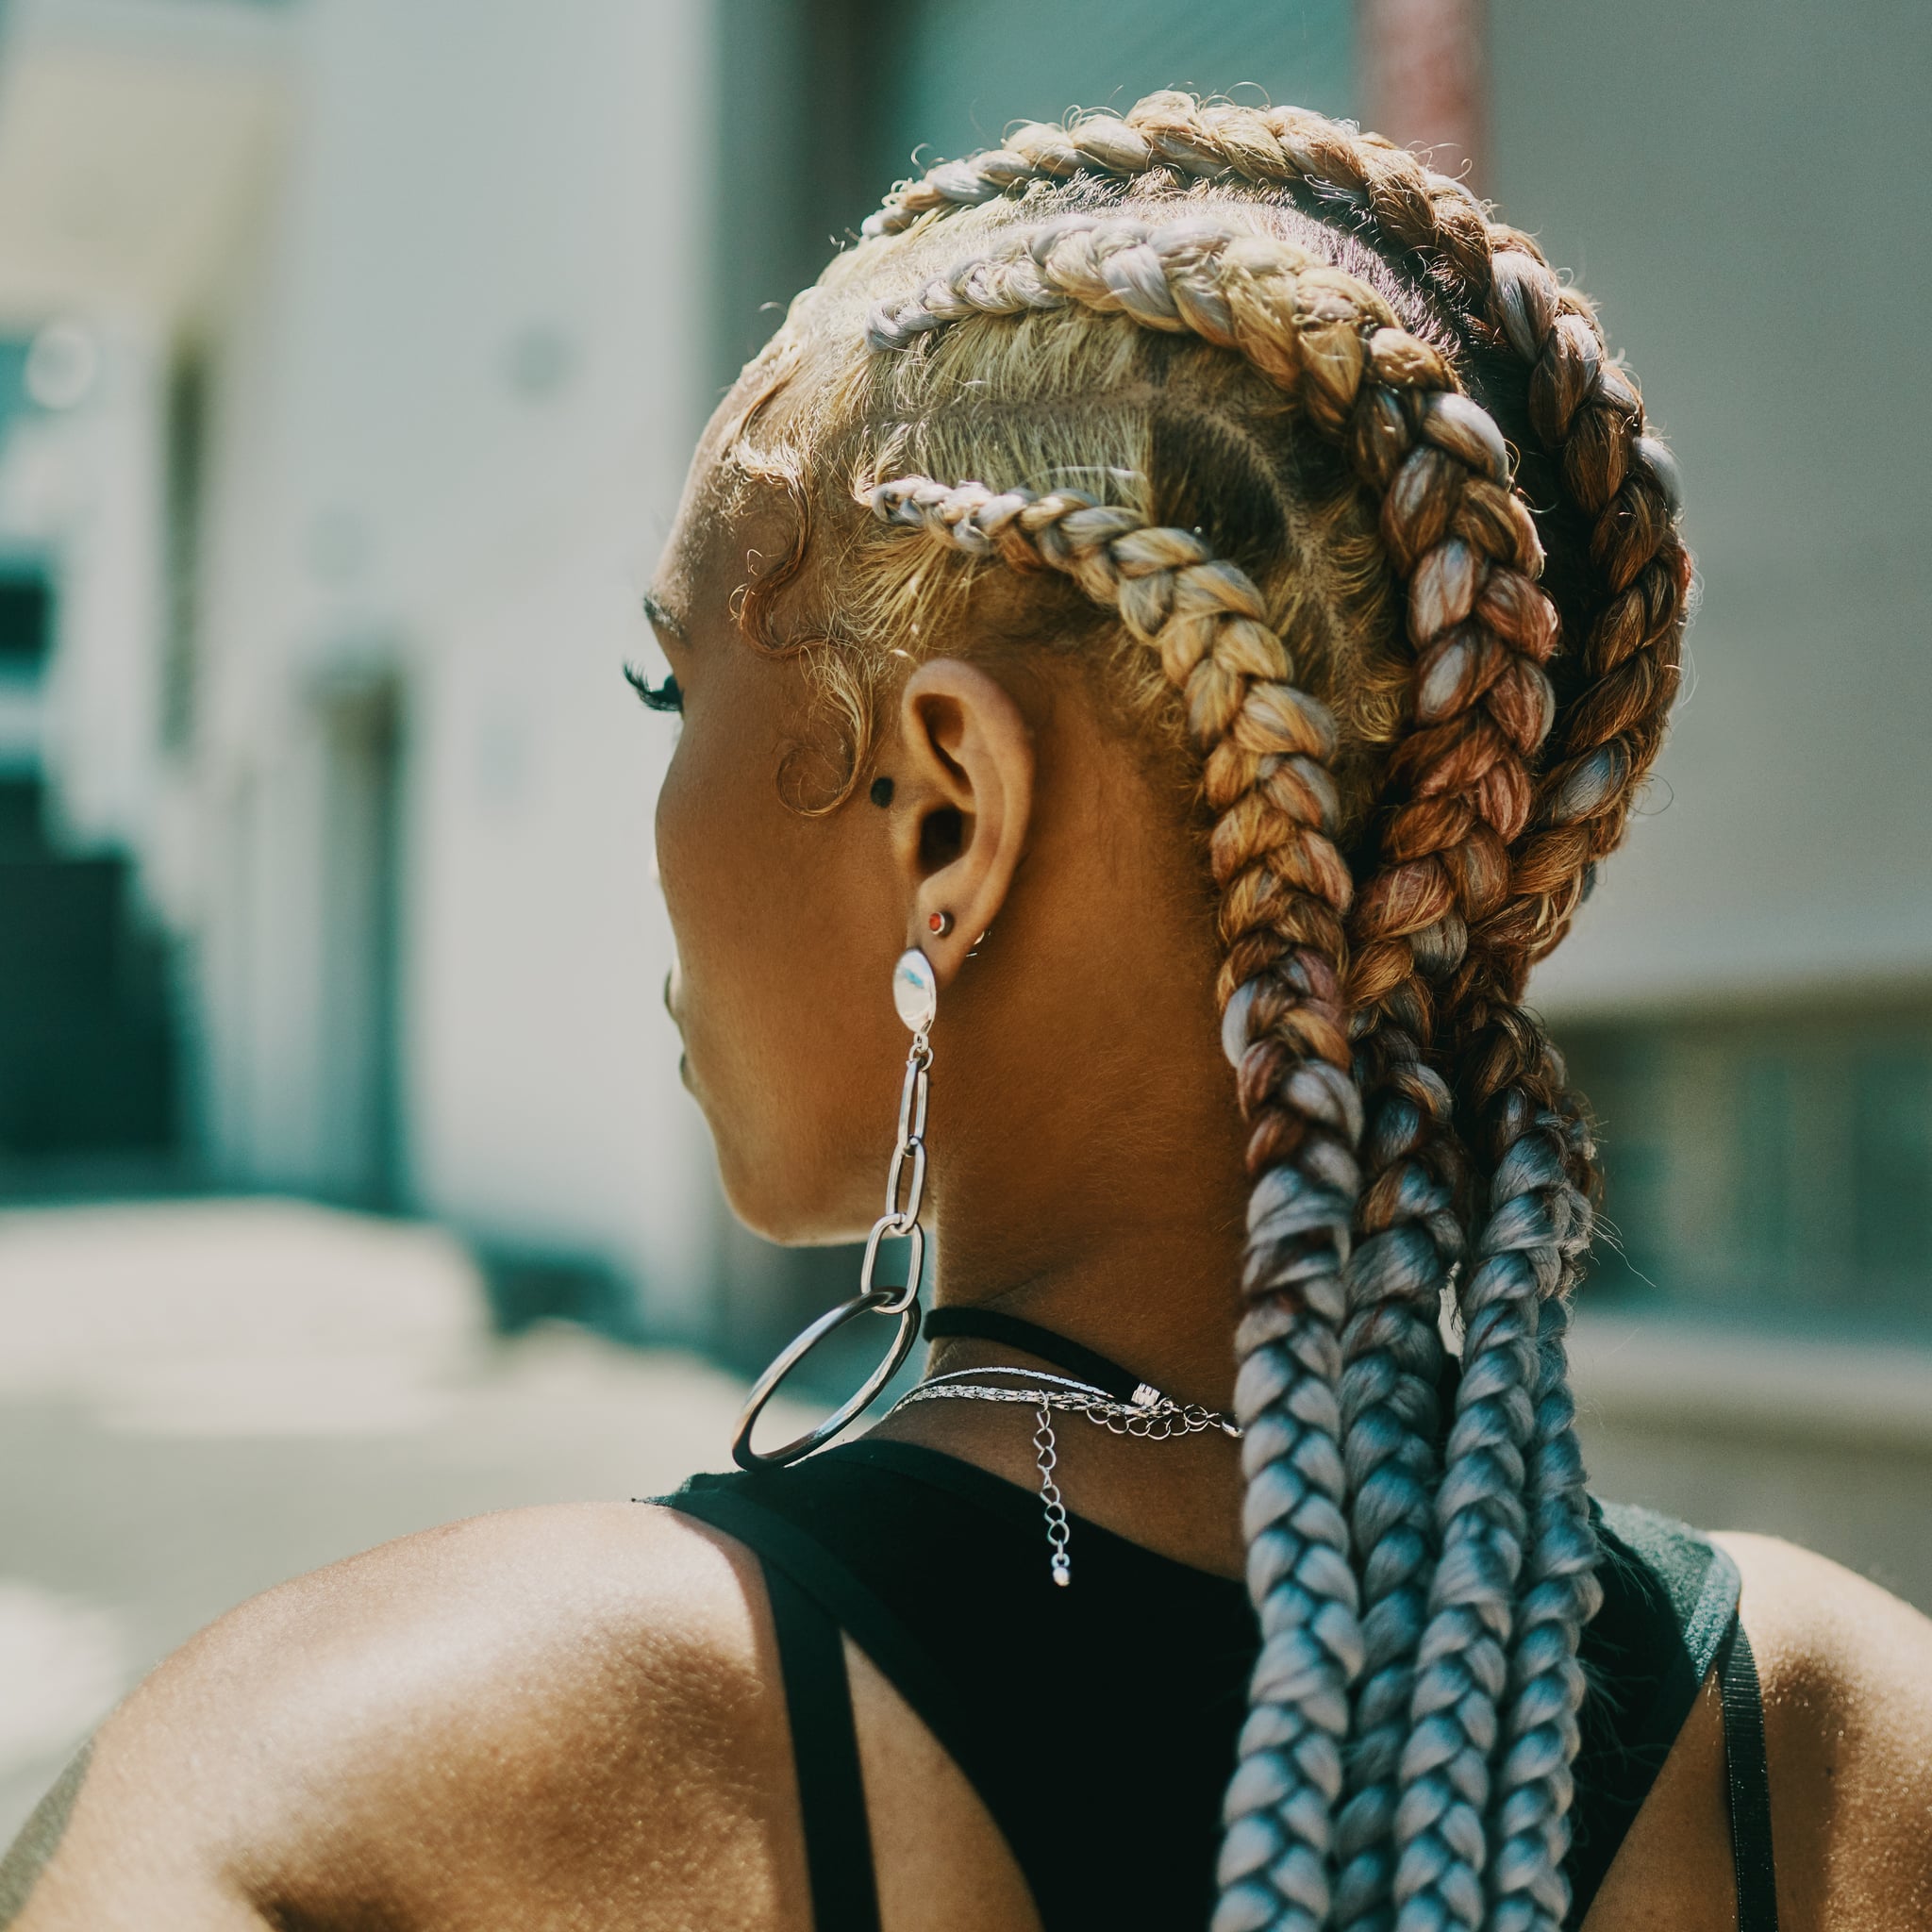 Designer Cornrows Is the Braided Hairstyle Trend of 2022